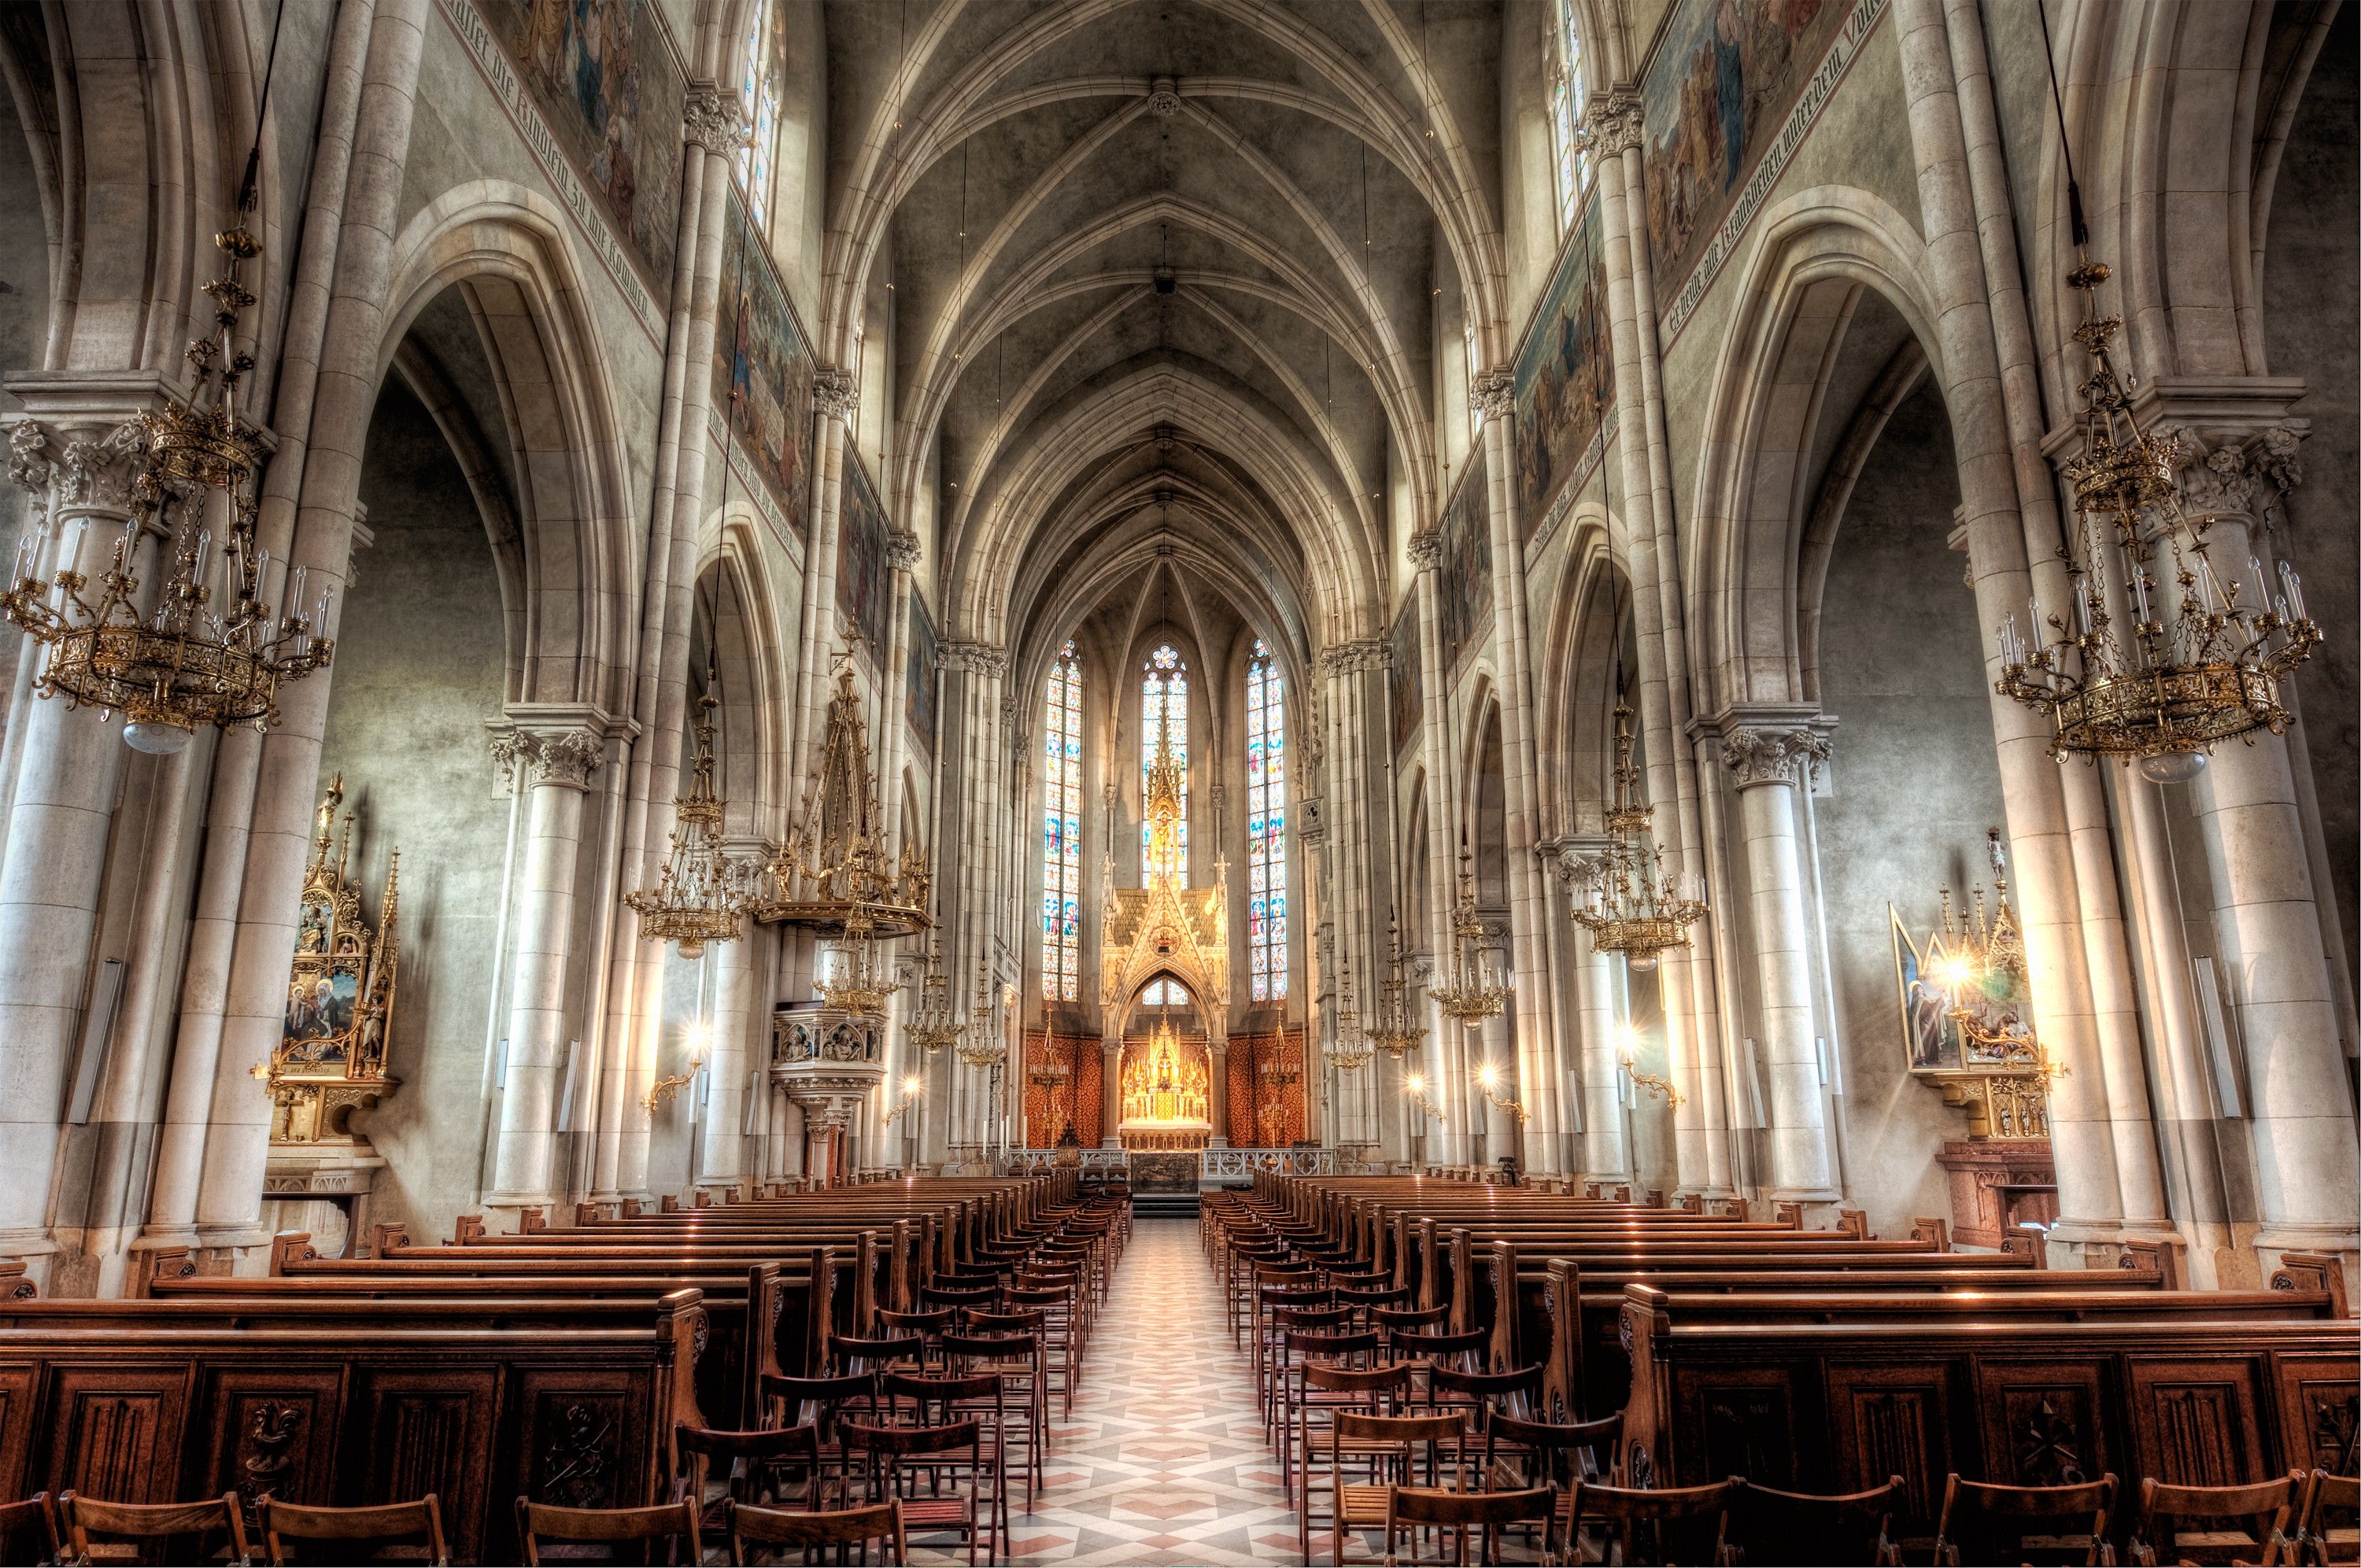 cathedral, religious, arch, architecture, chair, chandelier, cathedrals